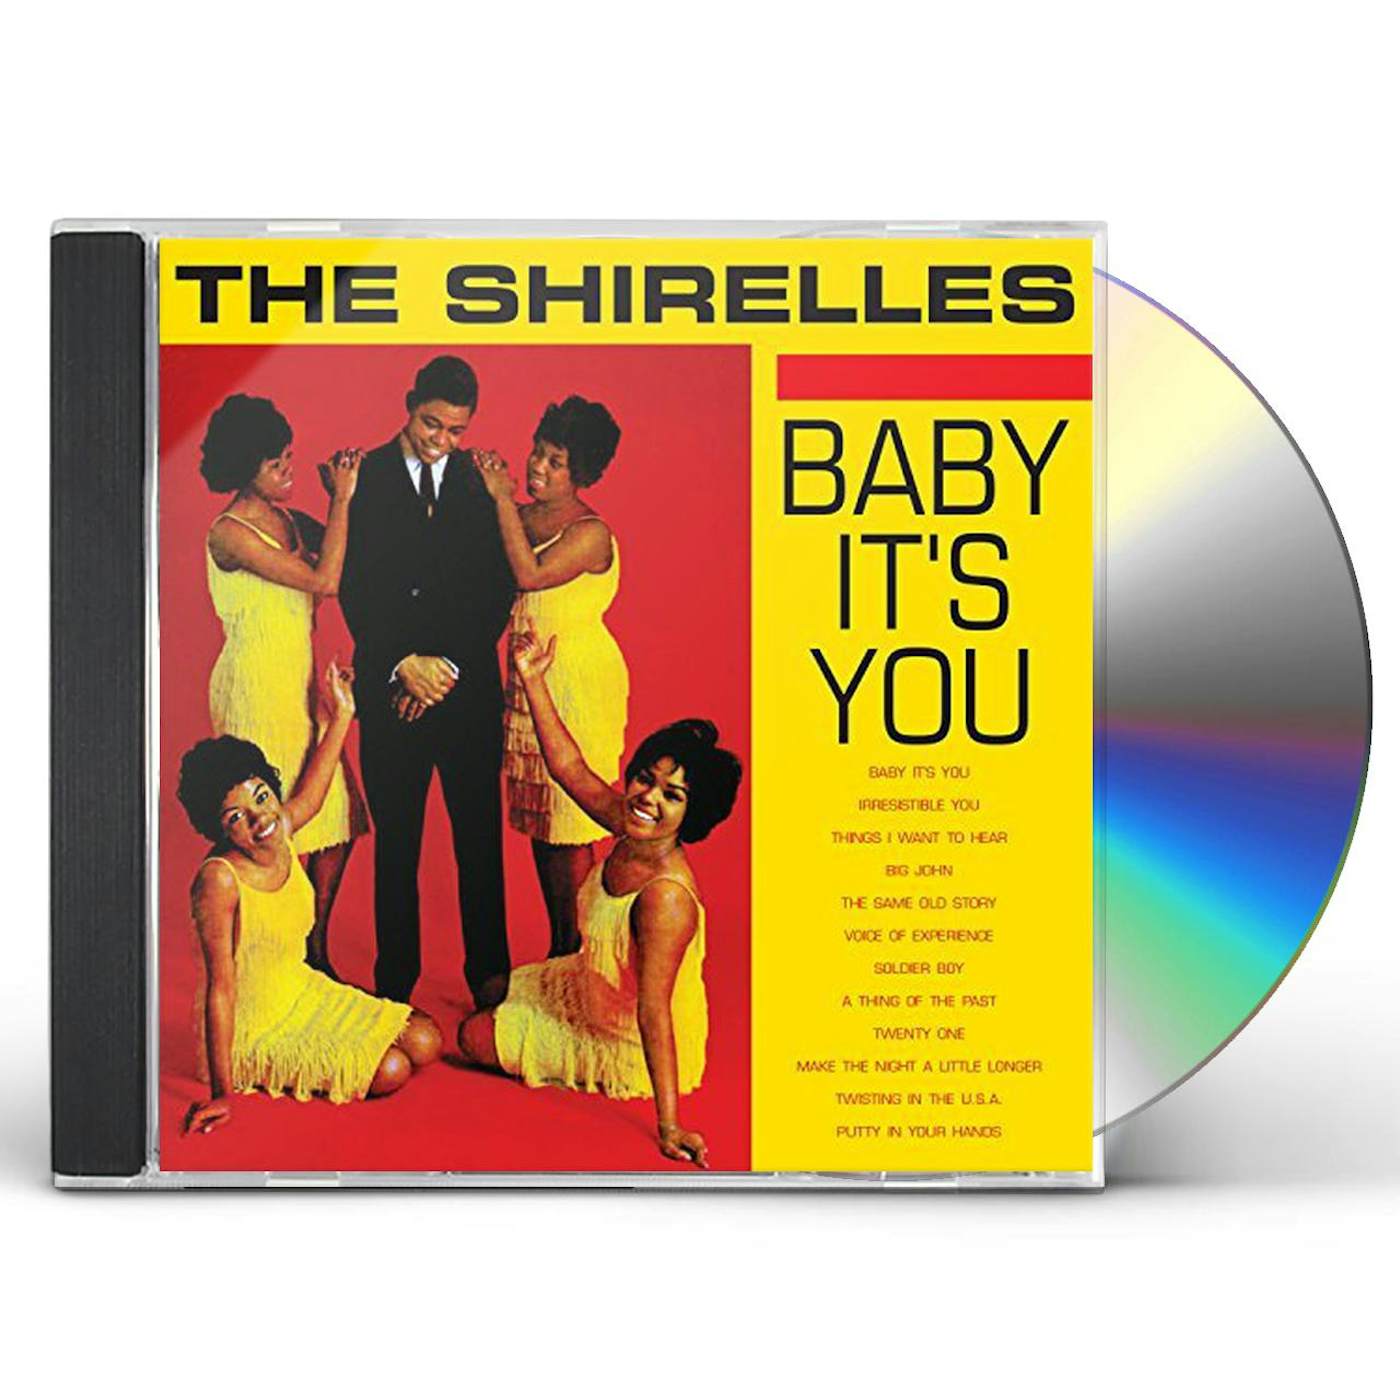 The Shirelles BABY IT'S YOU CD